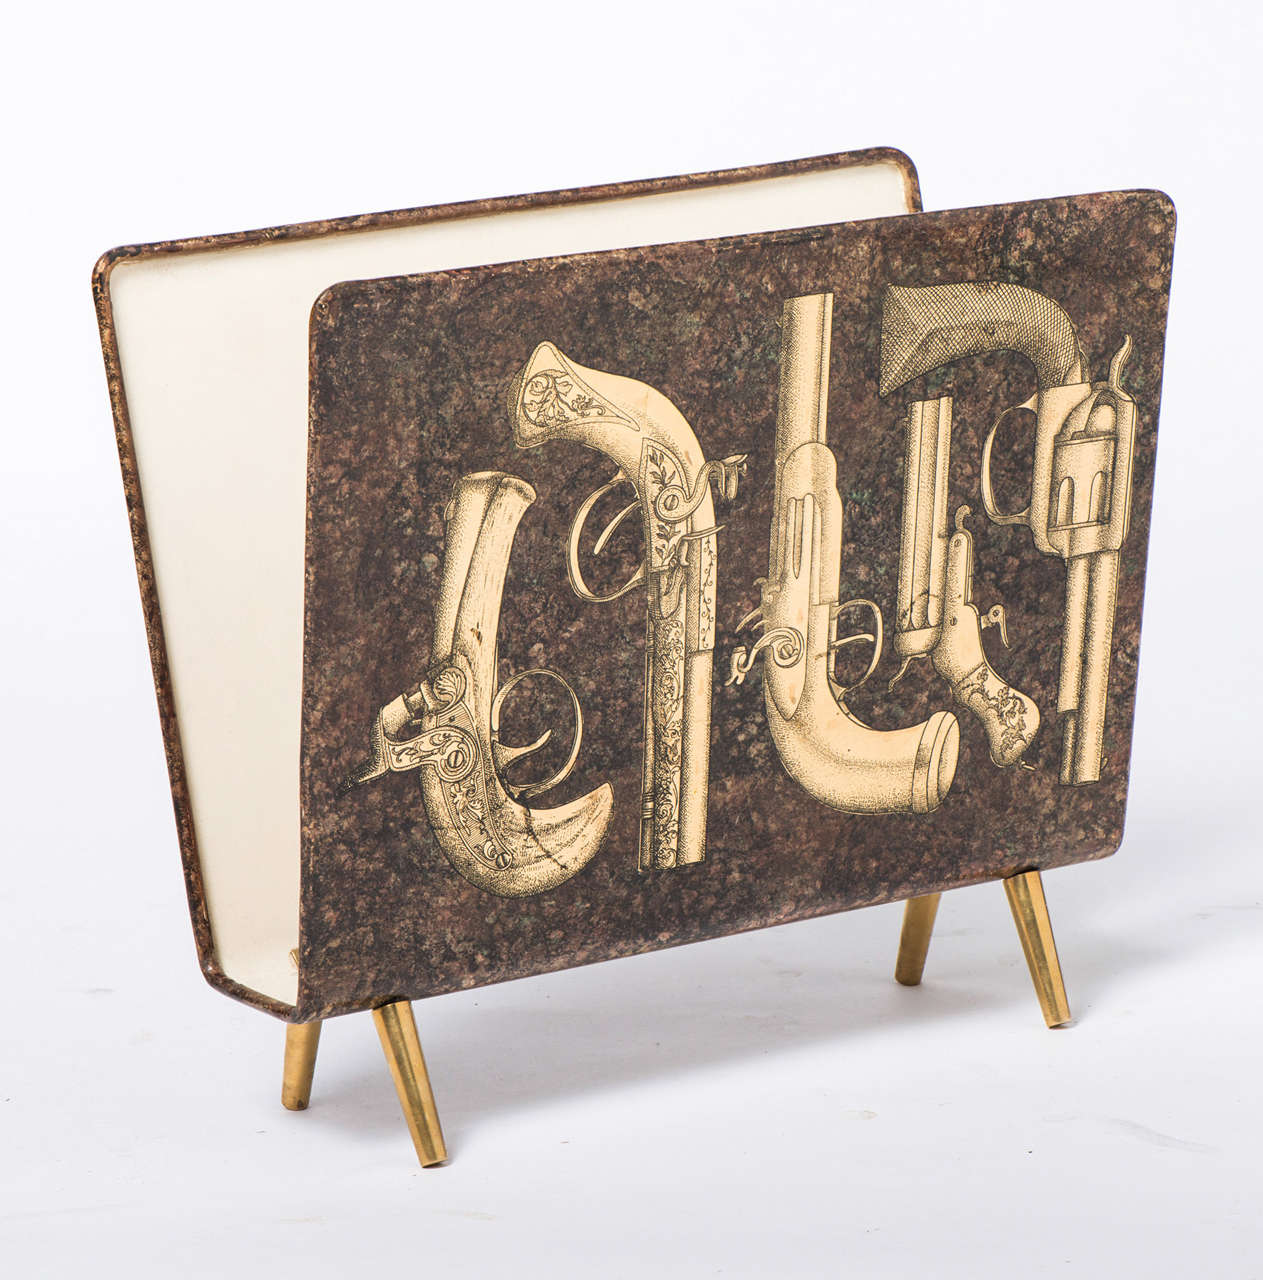 A Piero Fornasetti “Pistole” magazine Stand.
Lithographically printed and hand colored metal. 
Brass feet.
Italy, circa 1950.
Labeled.
Measures: 38.5 x 43 x 22.